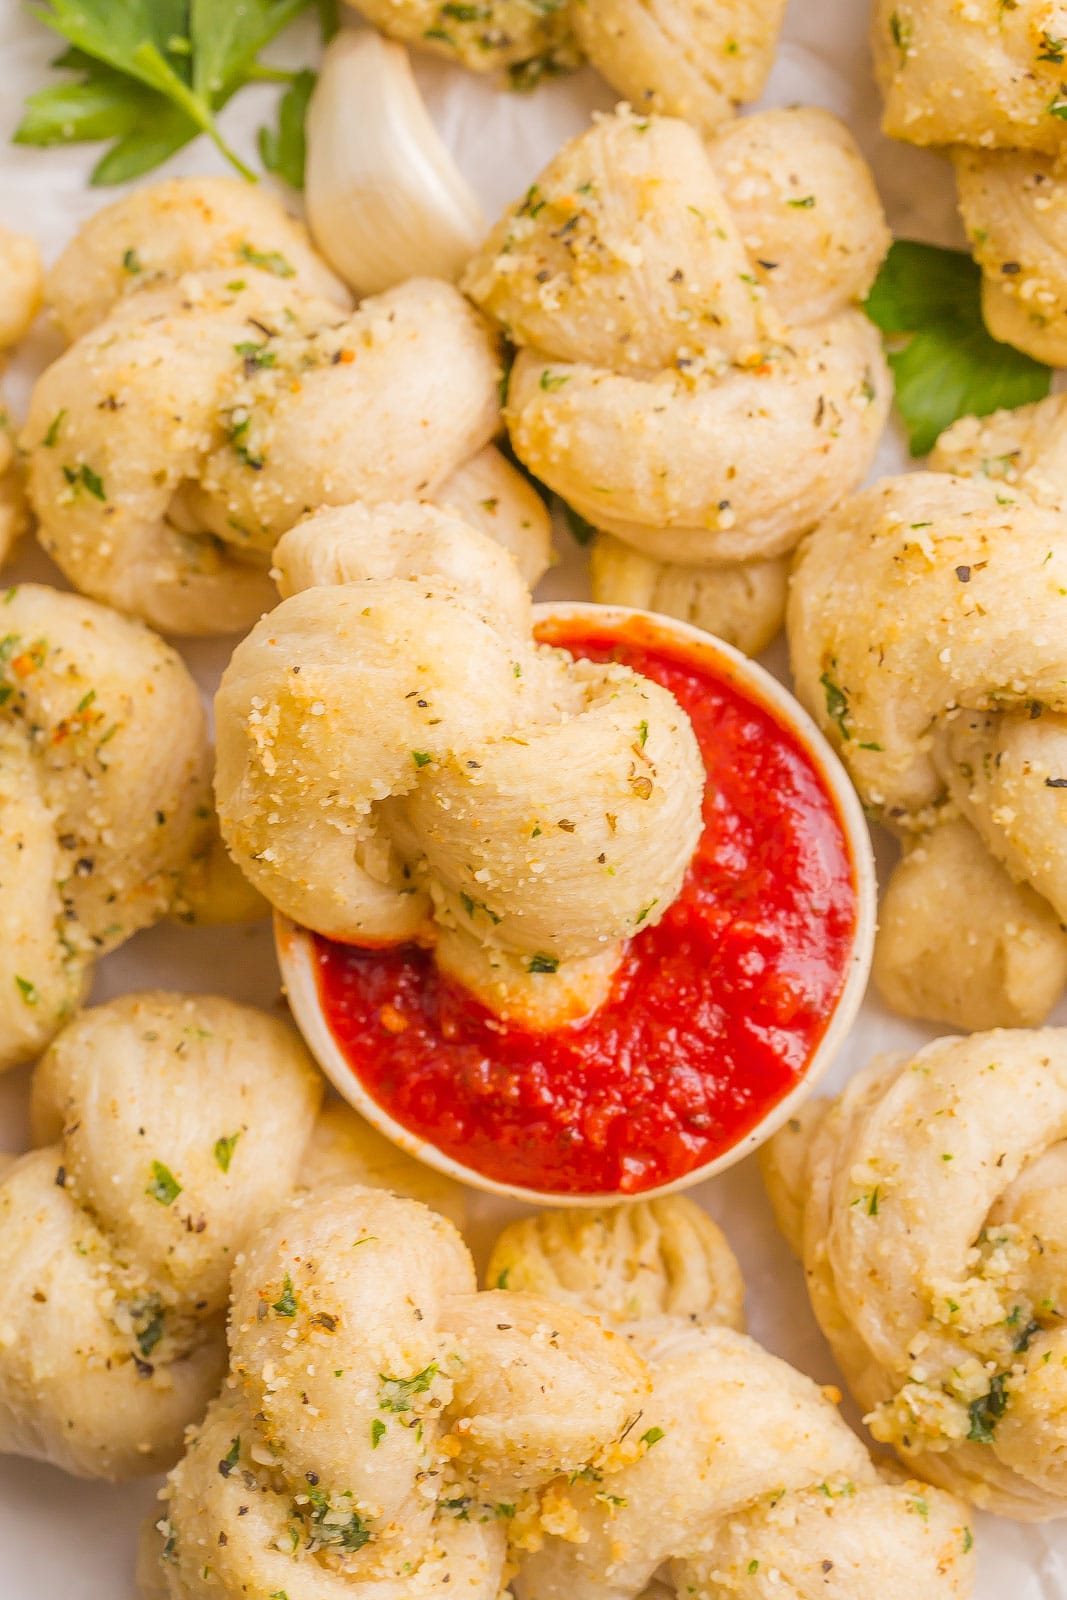 Garlic knot dipped in pizza sauce.